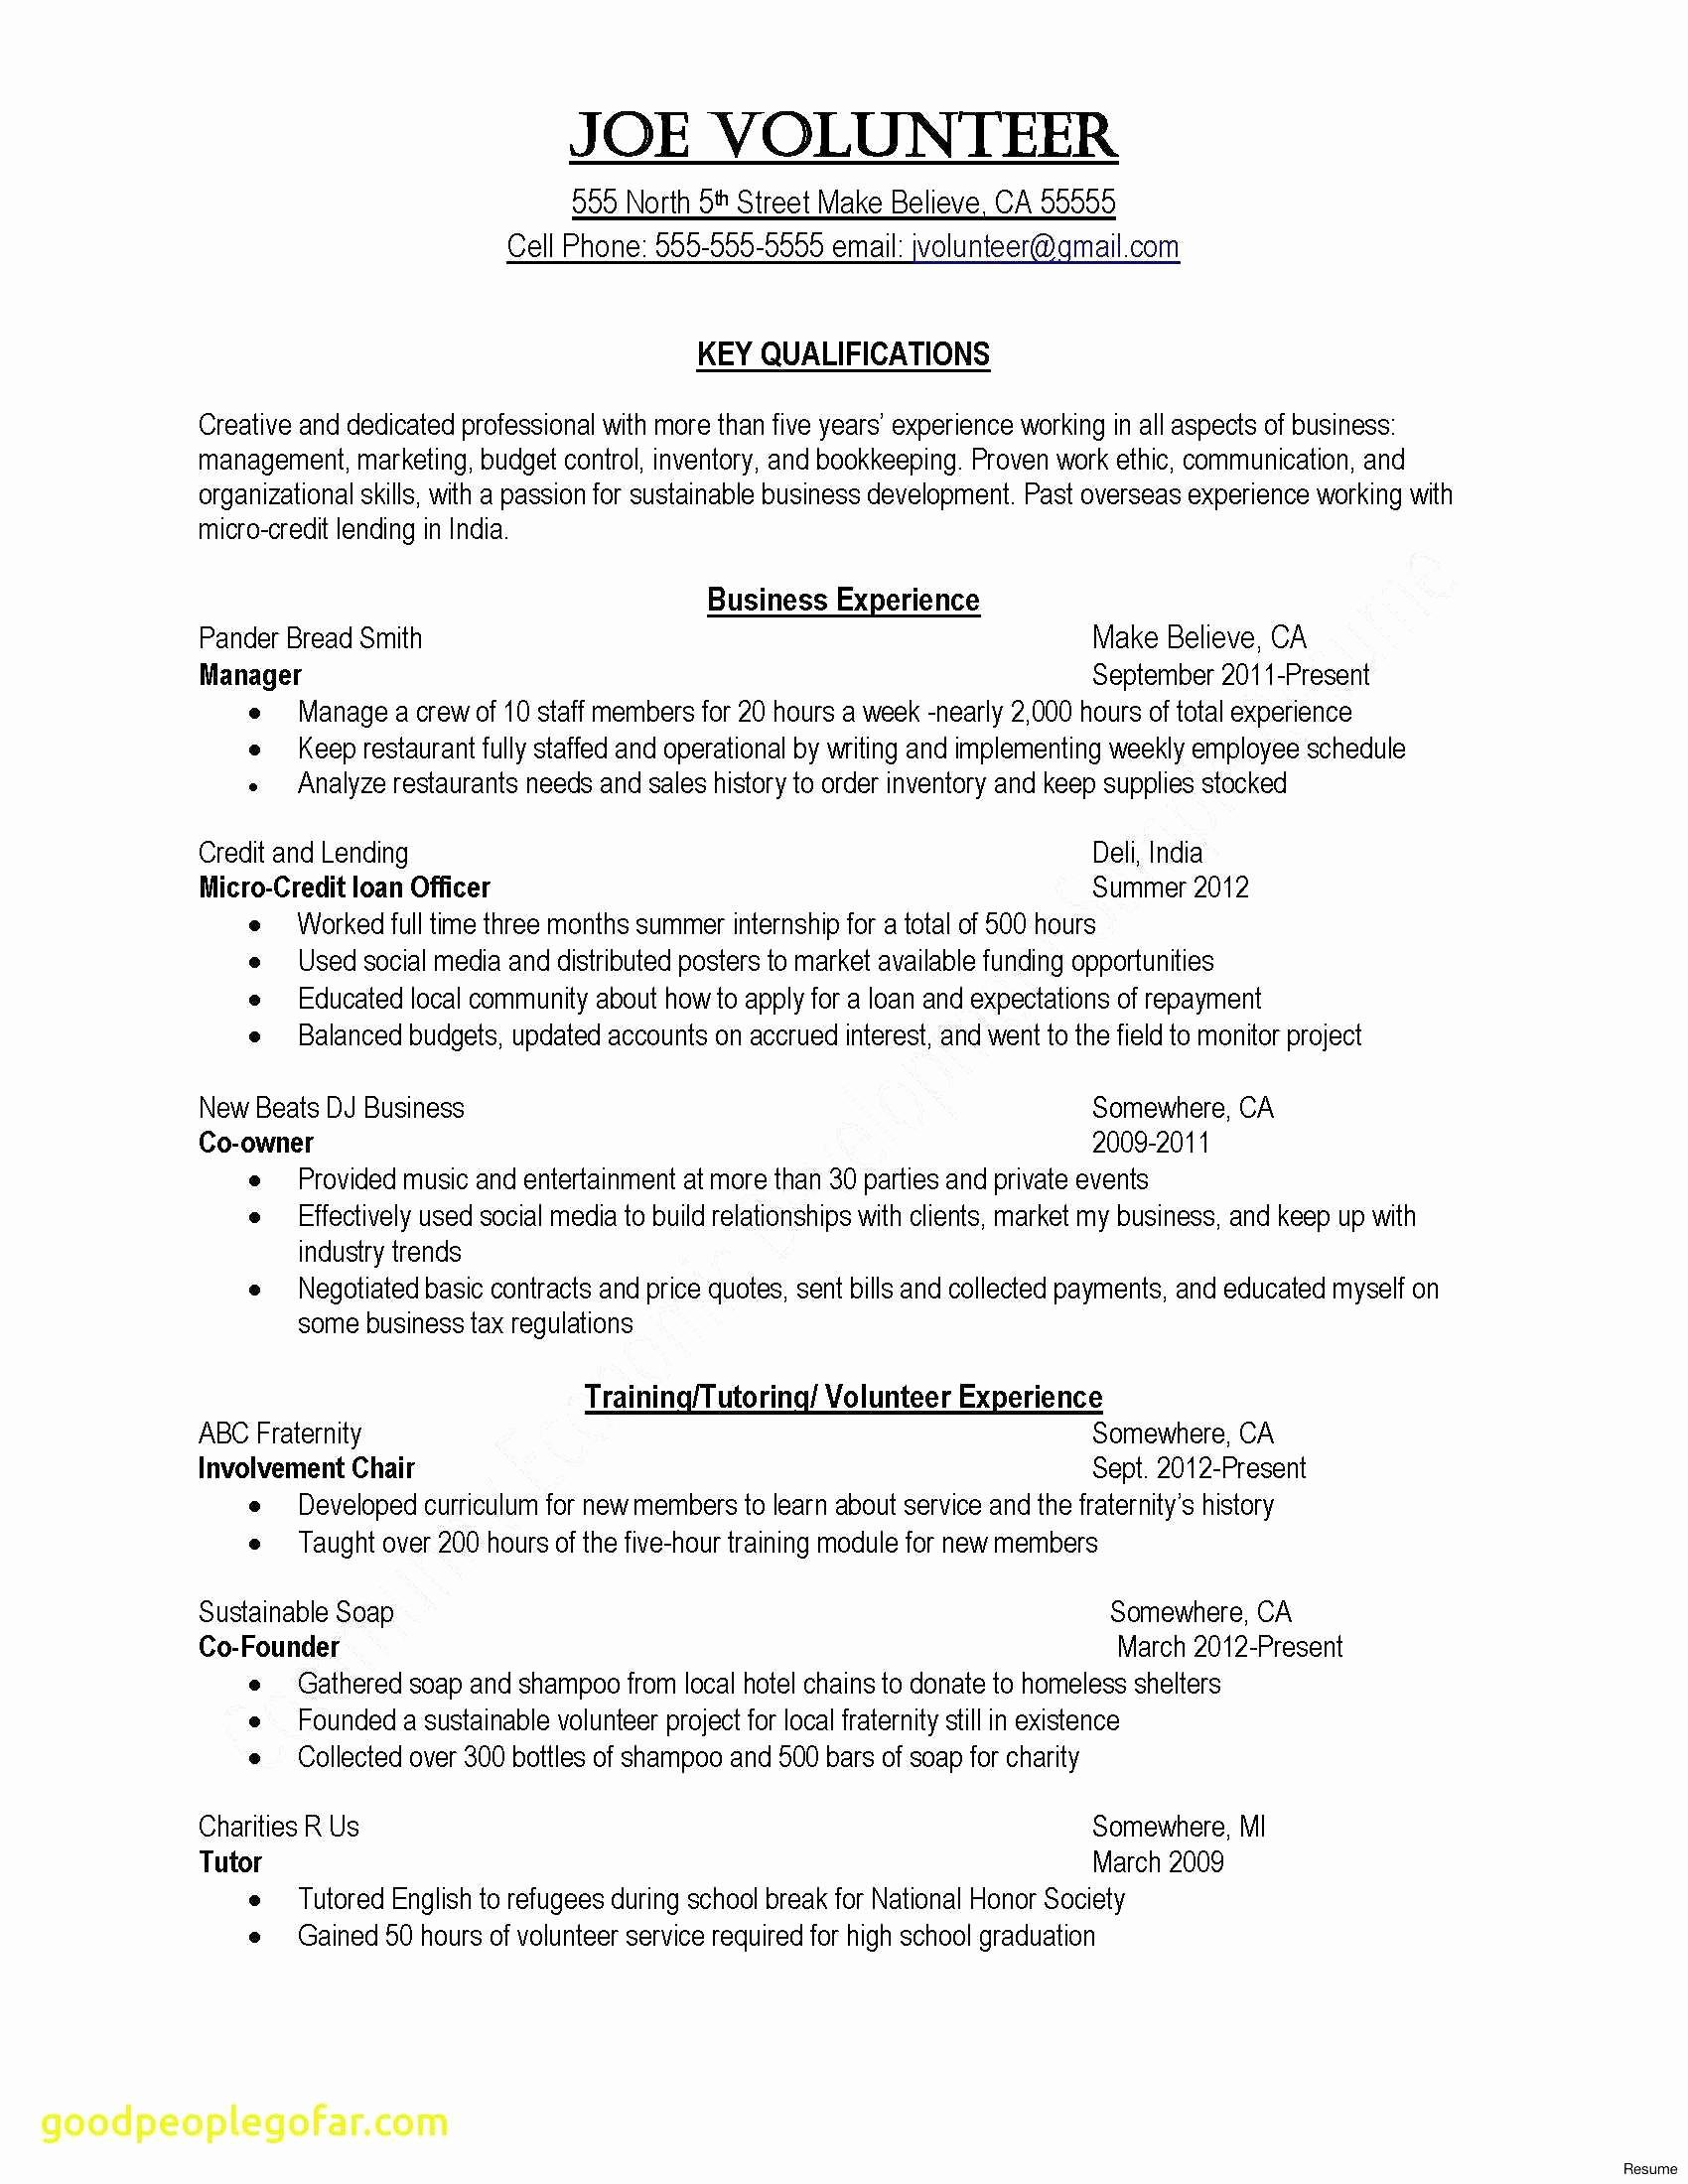 Resume Cover Letter Template - Resume Cover Letter Template Beautiful Elegant Sample College